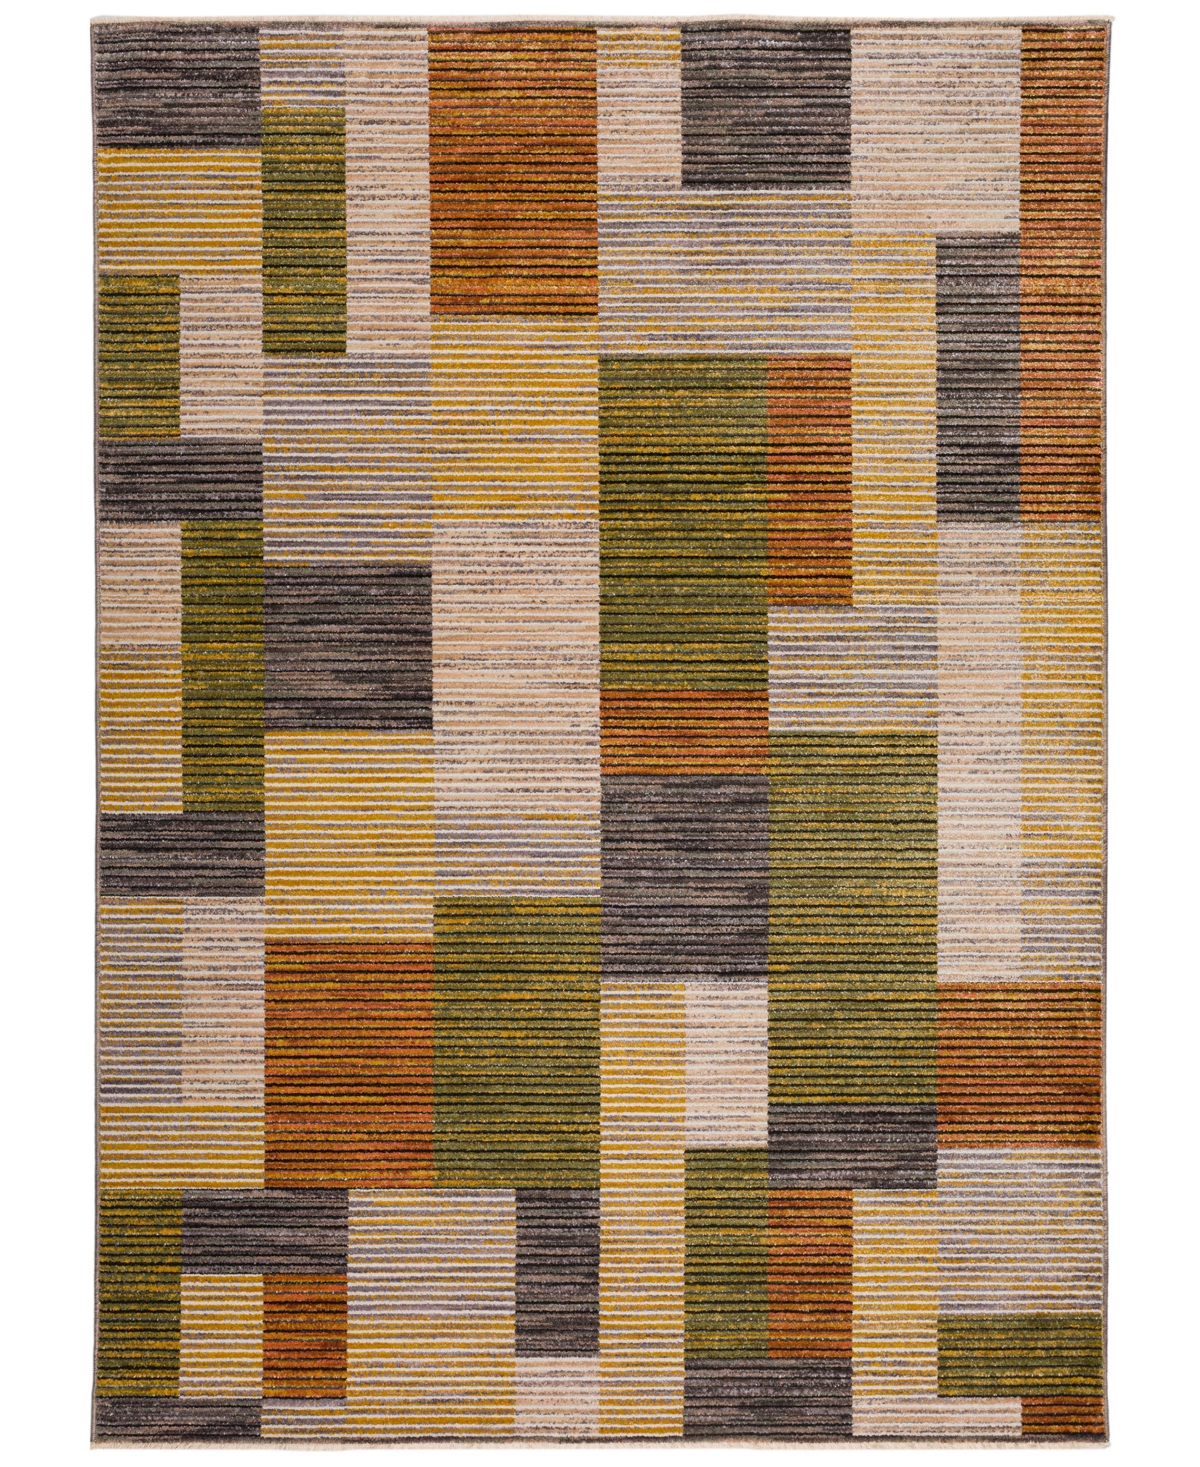 D Style Sergey Sgy5 5' X 7'6" Area Rug In Multi